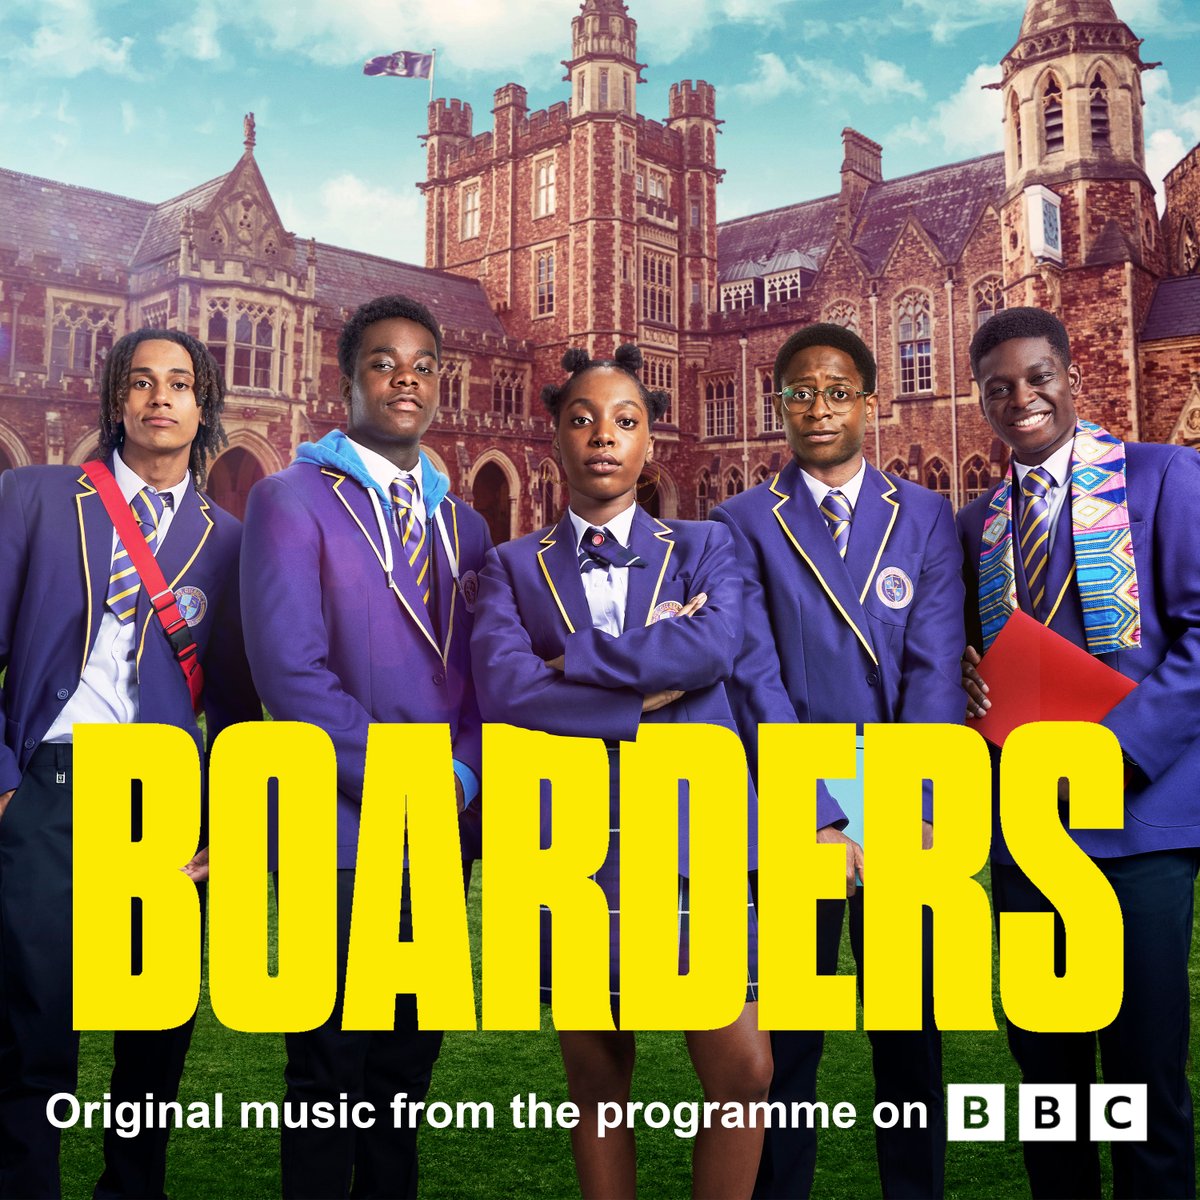 Following the fantastic launch of #Boarders on BBC (UK) and Tubi (US), fans can now listen to all of the original music from the series on the new album! 💿 Available now on Spotify, Apple Music and Amazon Music 🎶 @studiolambert